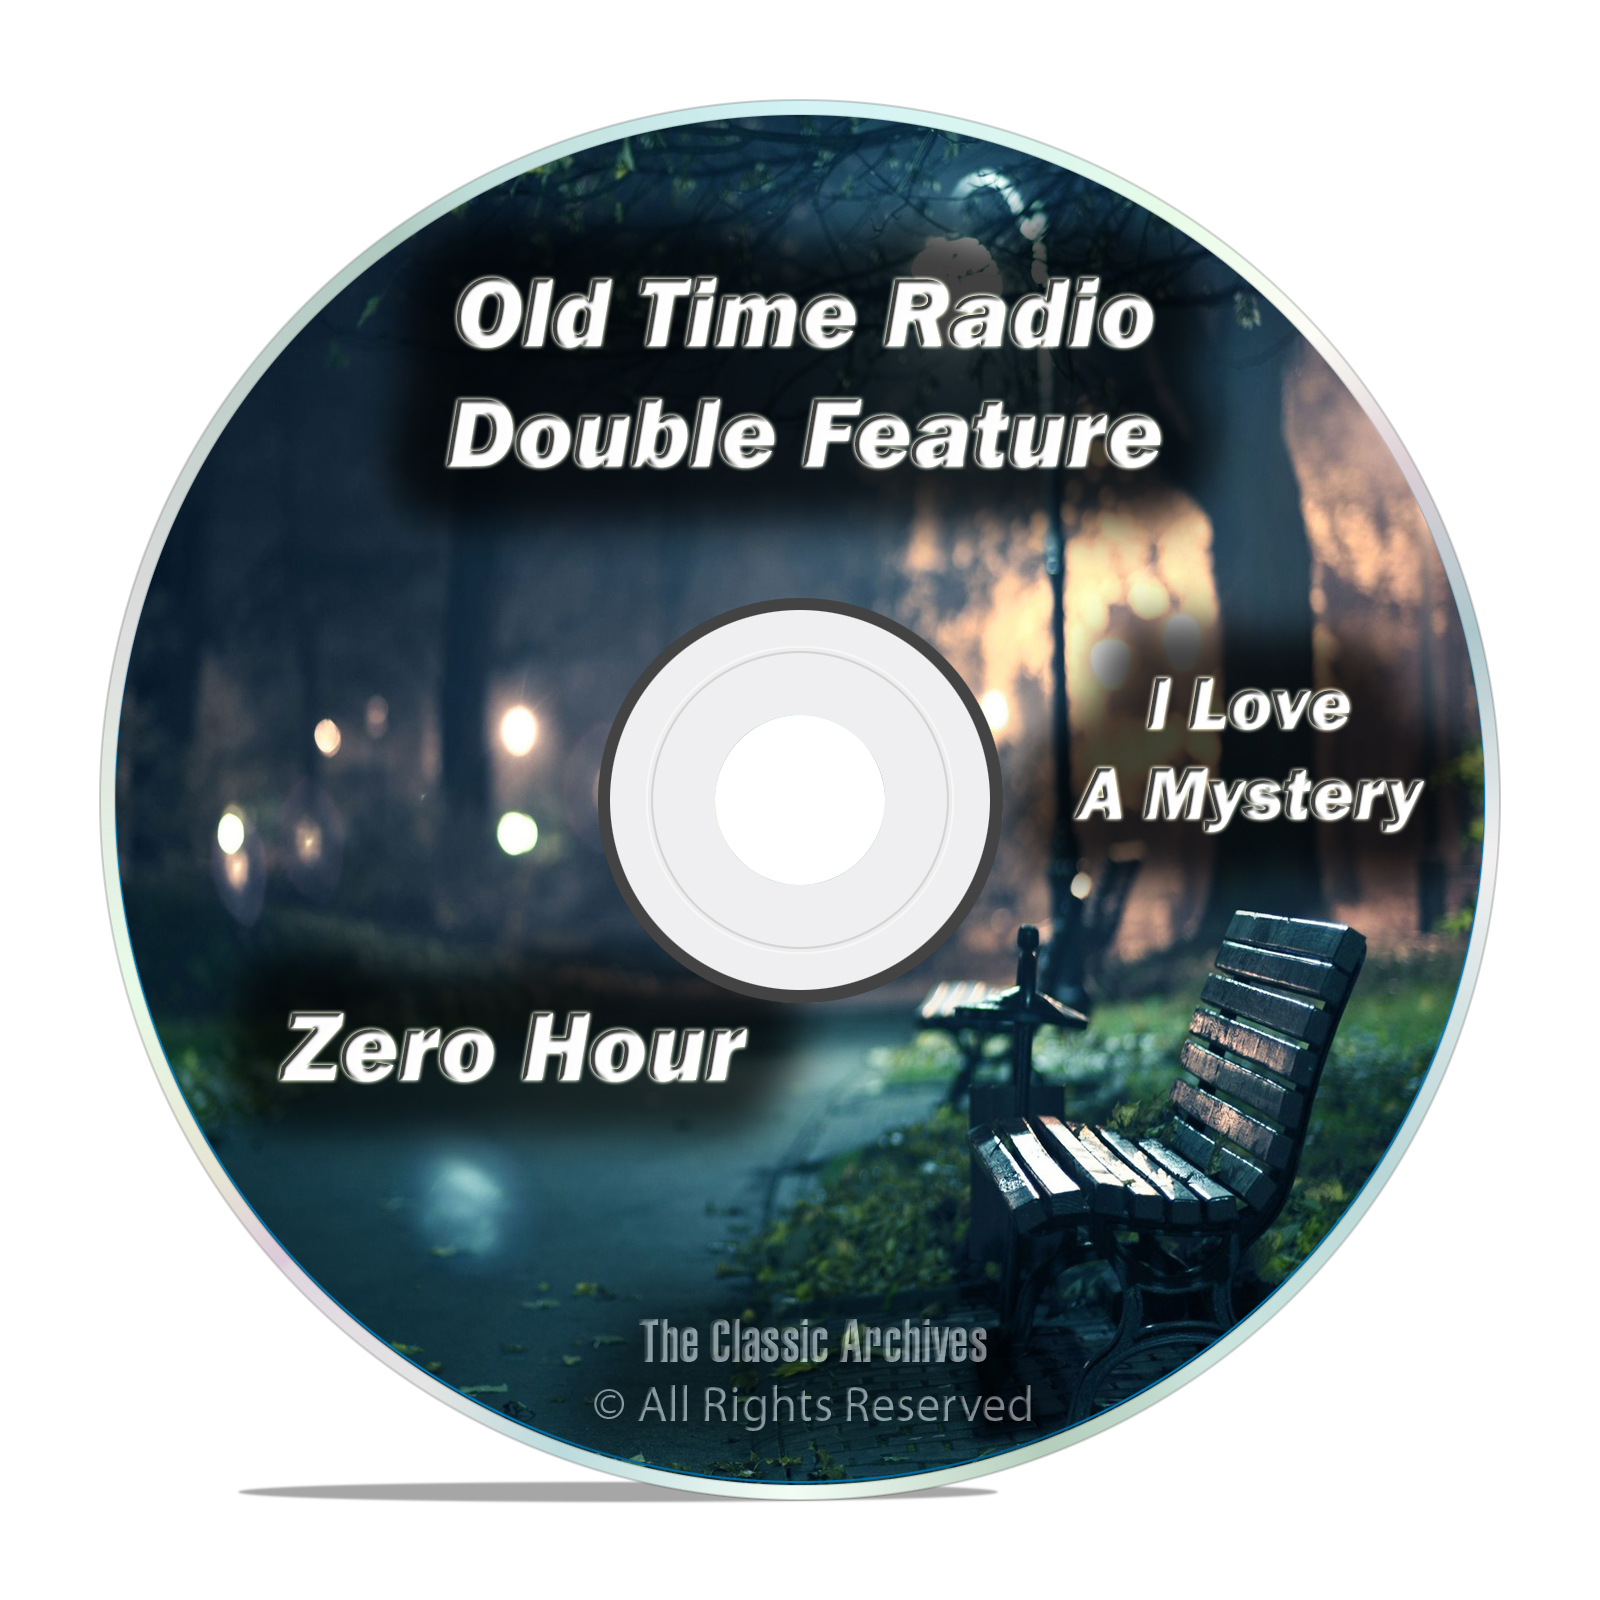 Zero Hour, I Love a Mystery, All Known 701 Old Time Radio Shows MP3 DVD